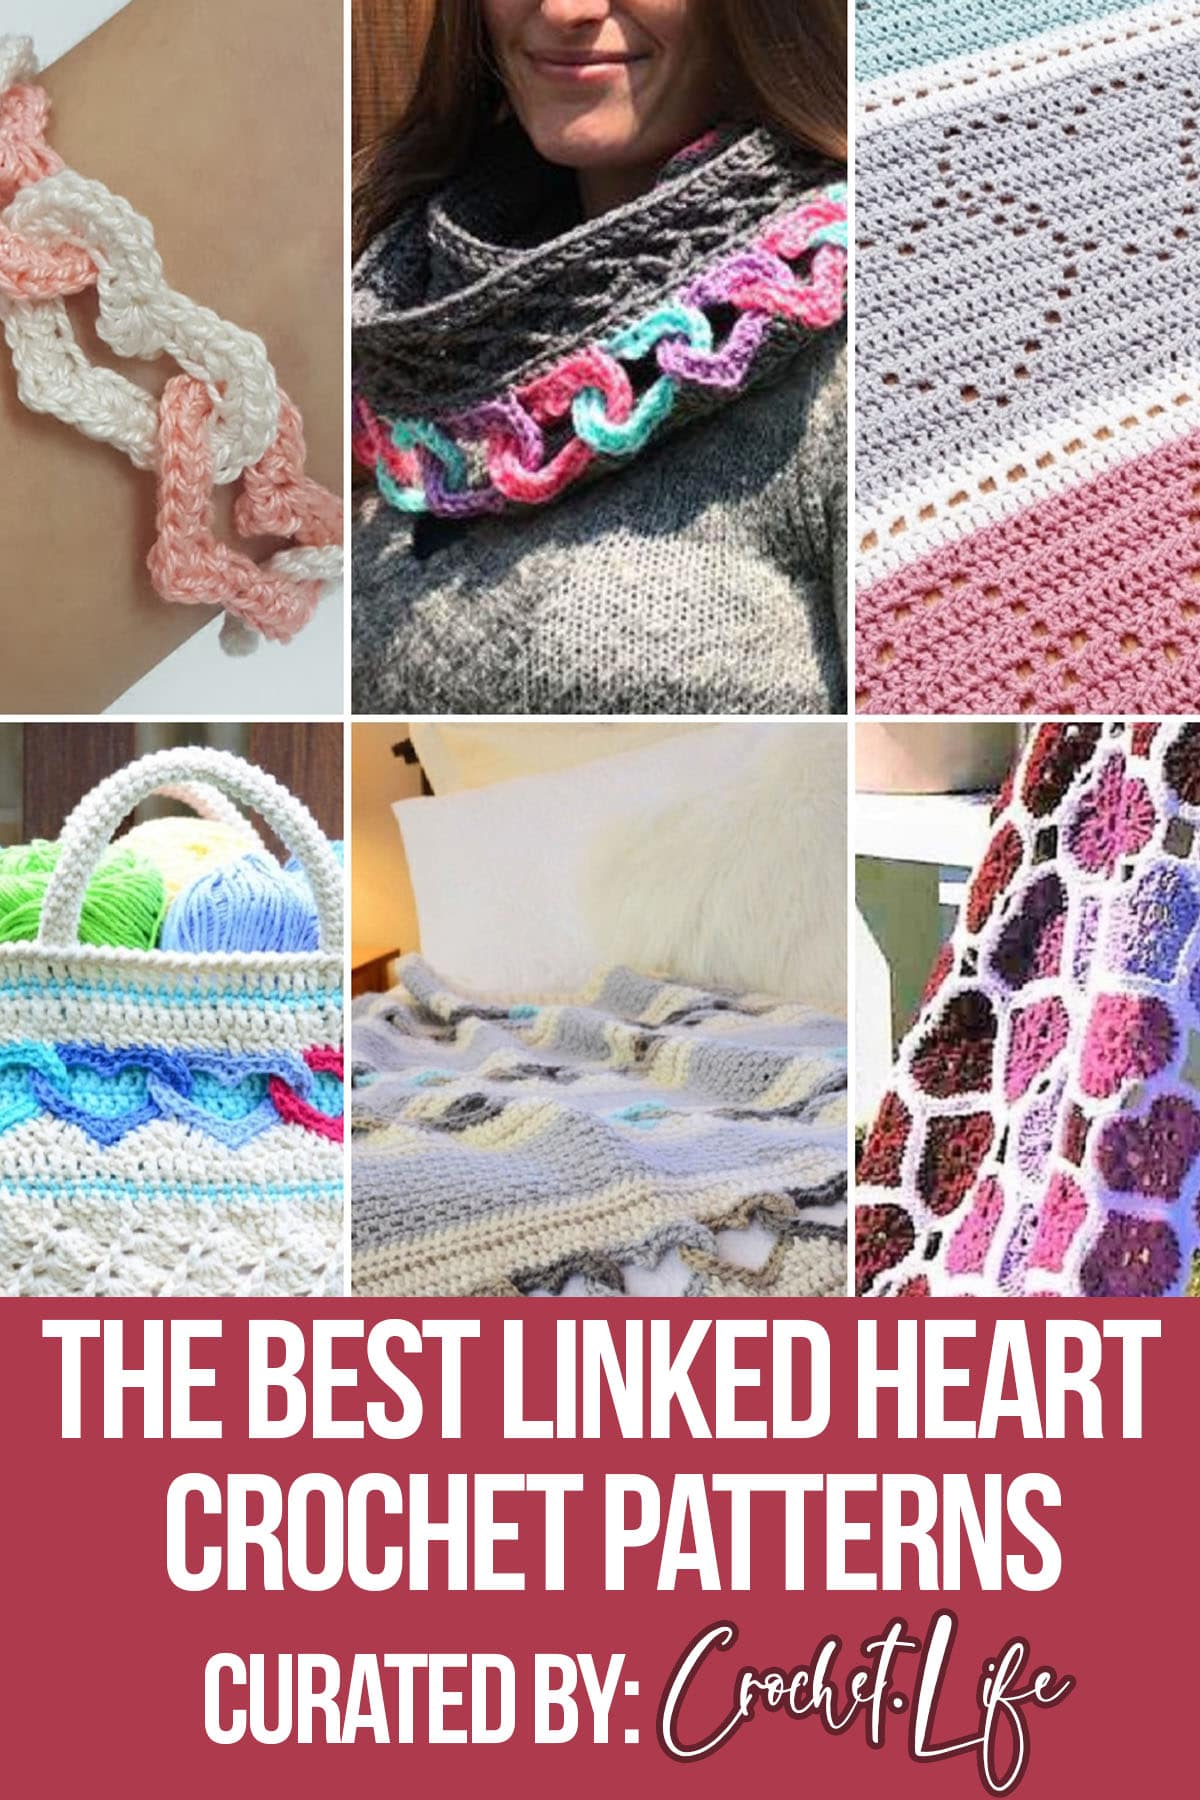 photo collage of crochet patterns for linked heart ideas with text which reads the best linked heart crochet patterns curated by crochet.life